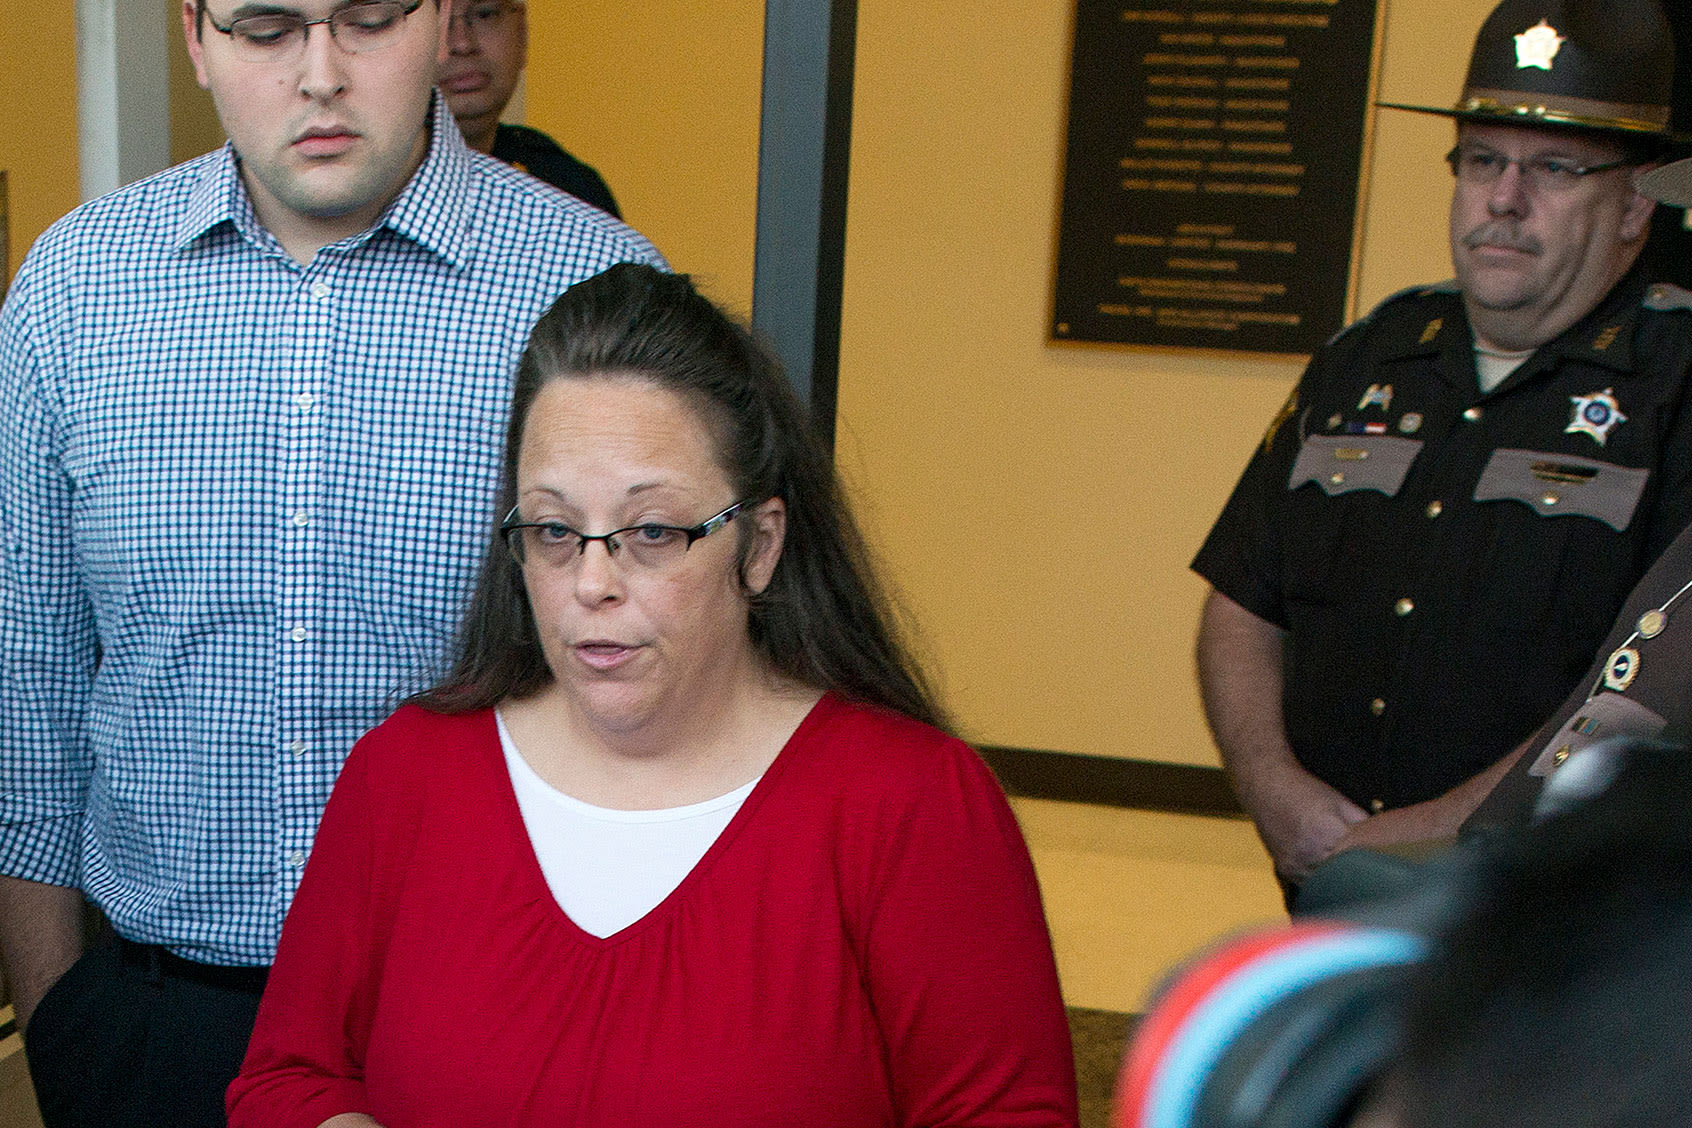 "A volcano you'd be setting off": Legal experts say Kim Davis could help chip away at LGBTQ+ rights